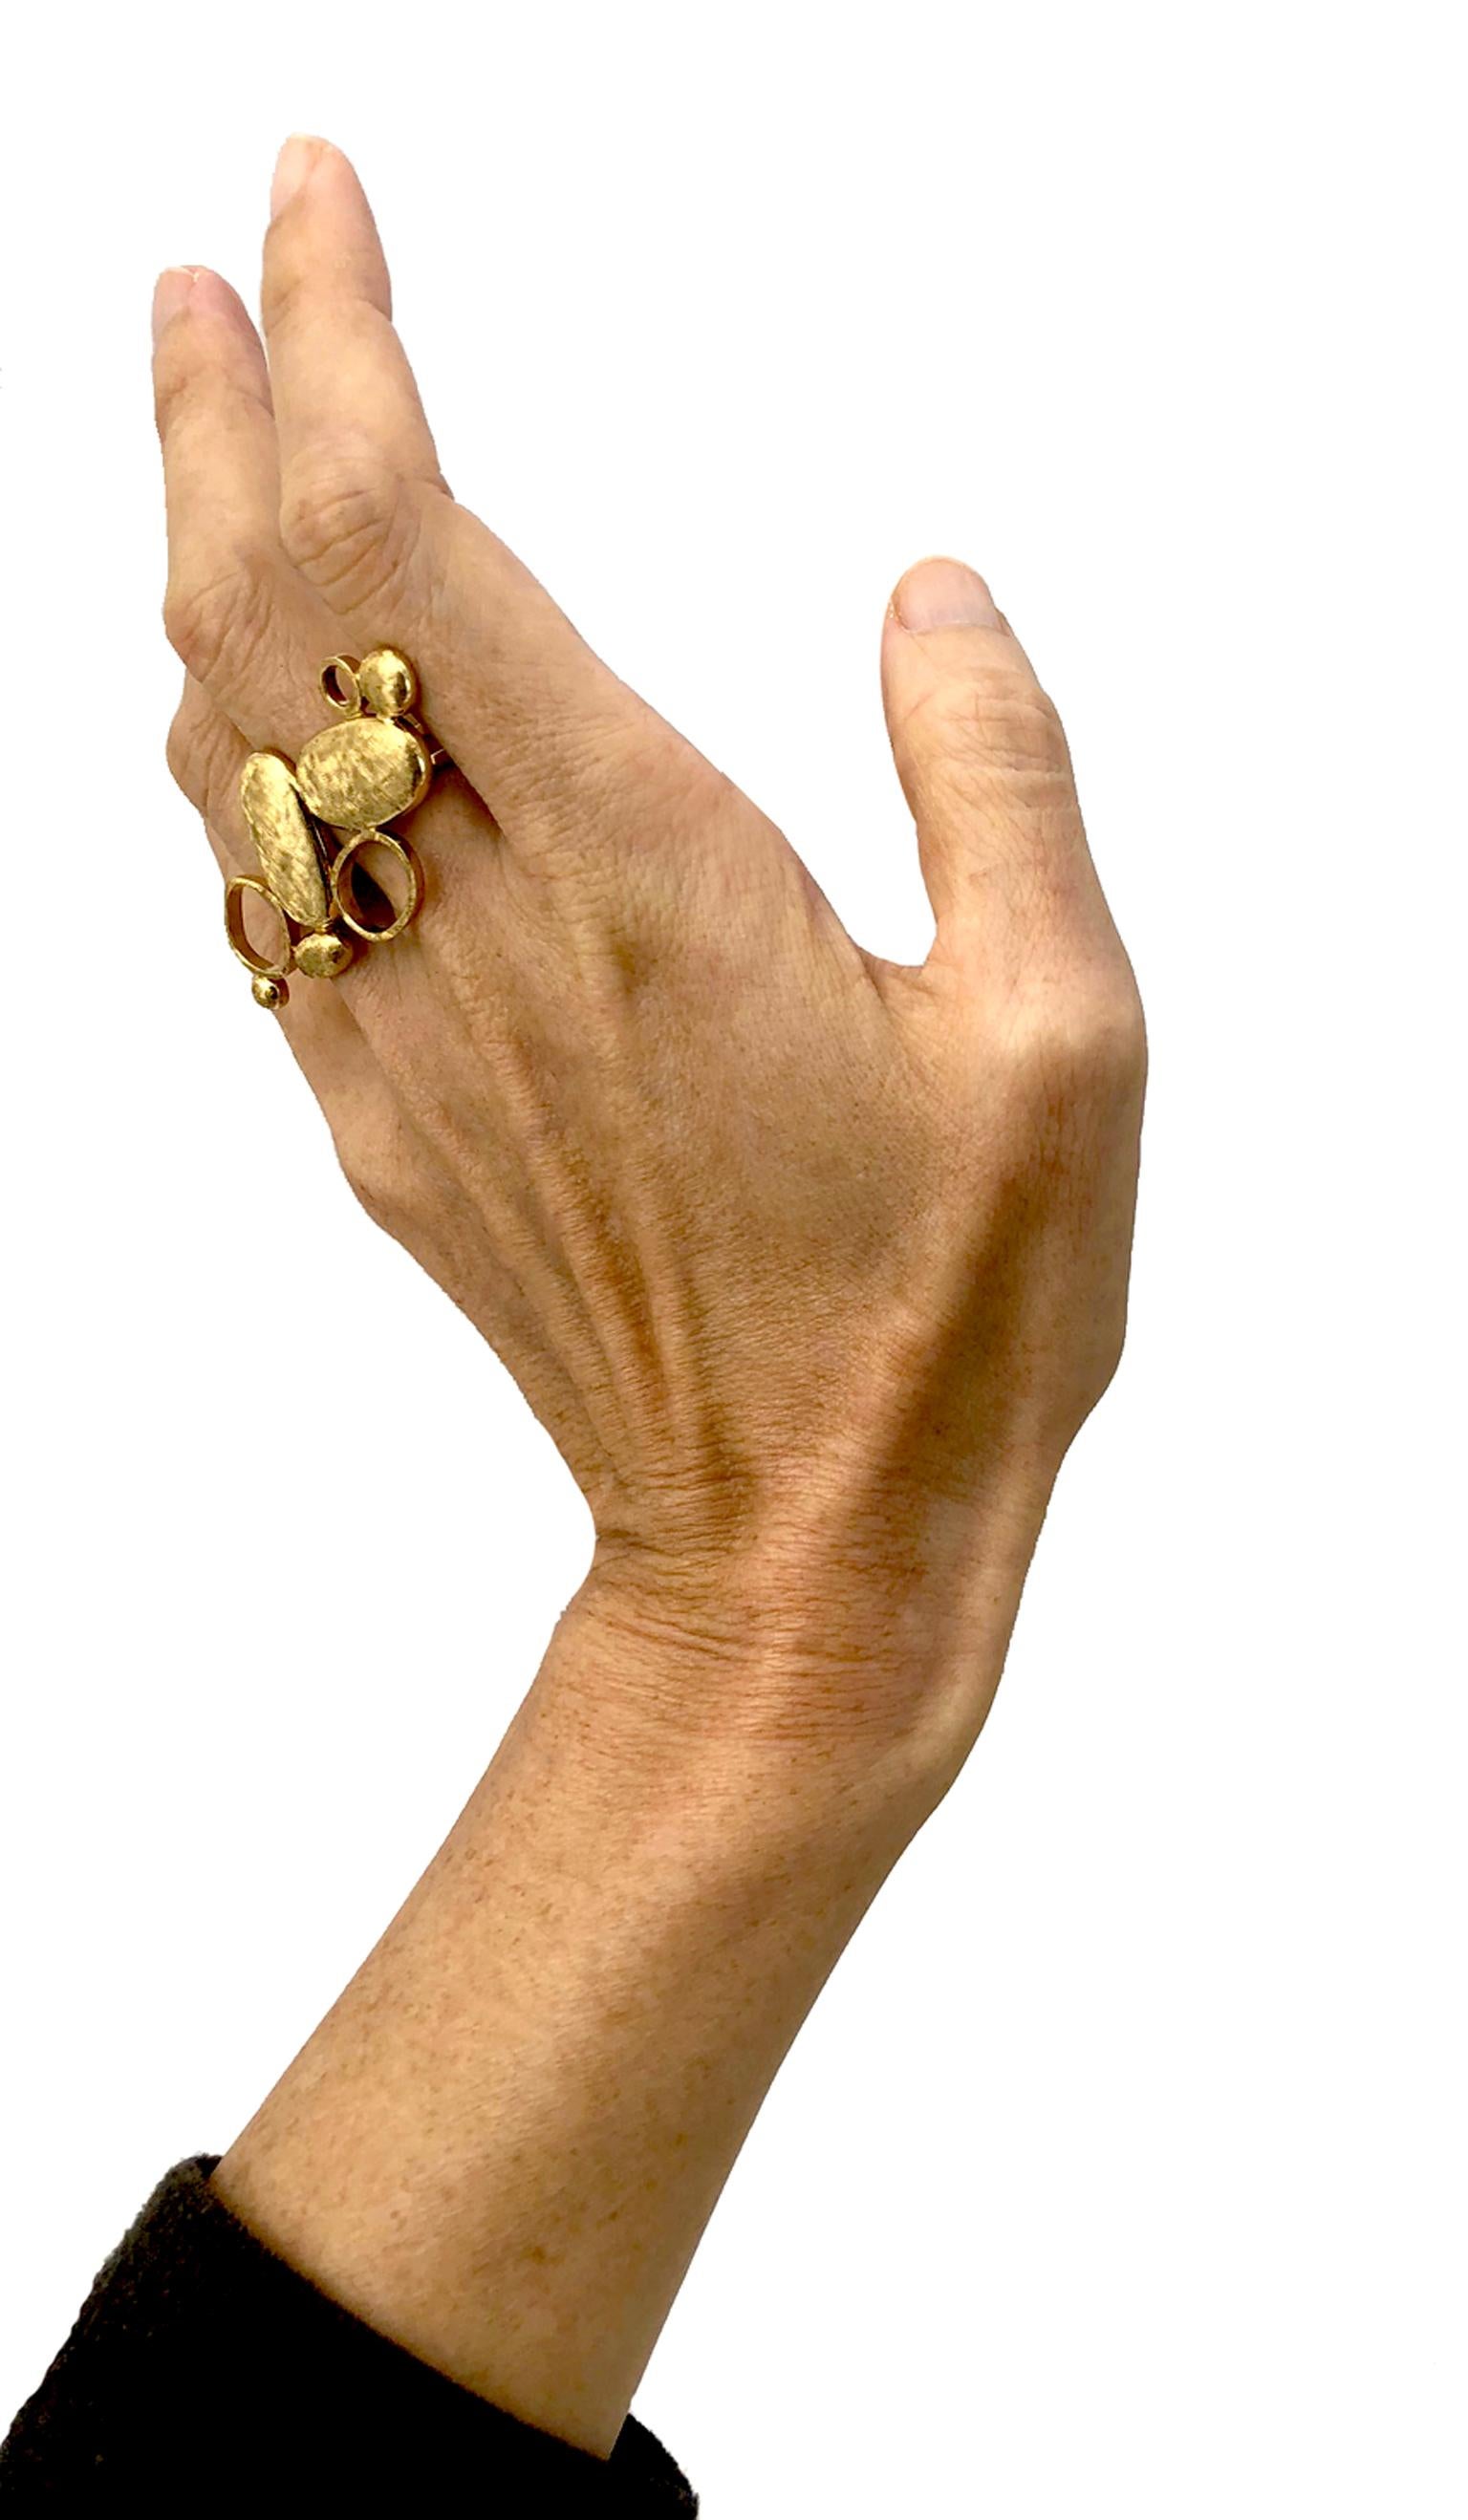 A Post Modern well crafted 18K Gold crossed-finger ring. 

A powerful statement piece decorated from the top to the back of your hand. This hand made ring fits comfortably. 

The interior diameter measured 16 mm. Size: appx 5.5 US 
Finished: